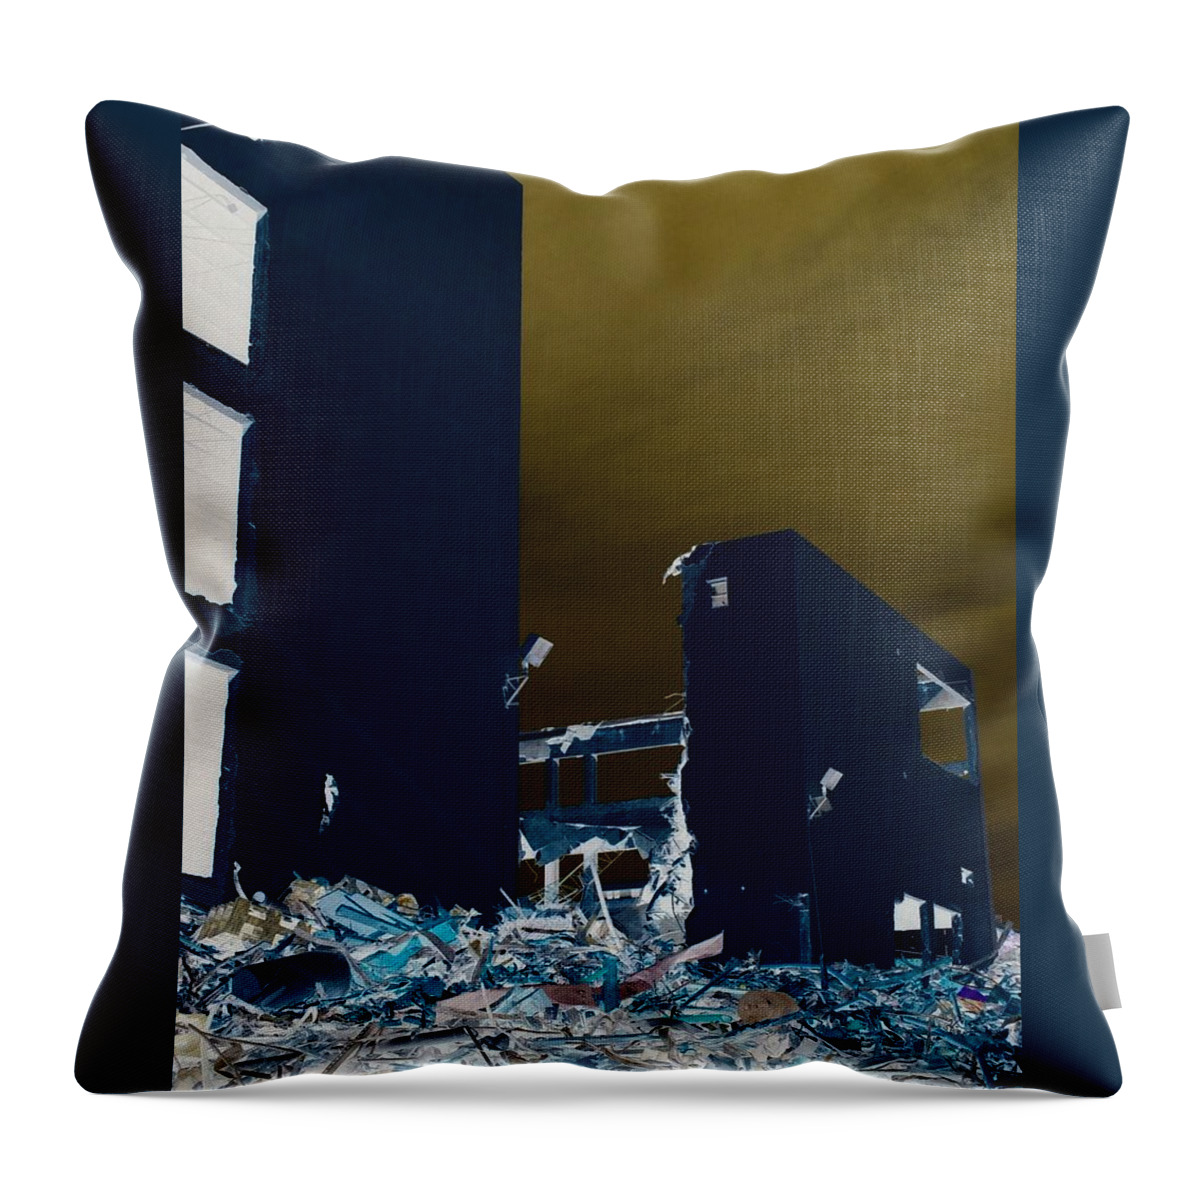 Demolish Demolition Negative Metal Rock Dirt Dirty Grunge Scrap Building Destruction Garbage Old Dark Evil Throw Pillow featuring the photograph Out With the Old by Culture Cruxxx